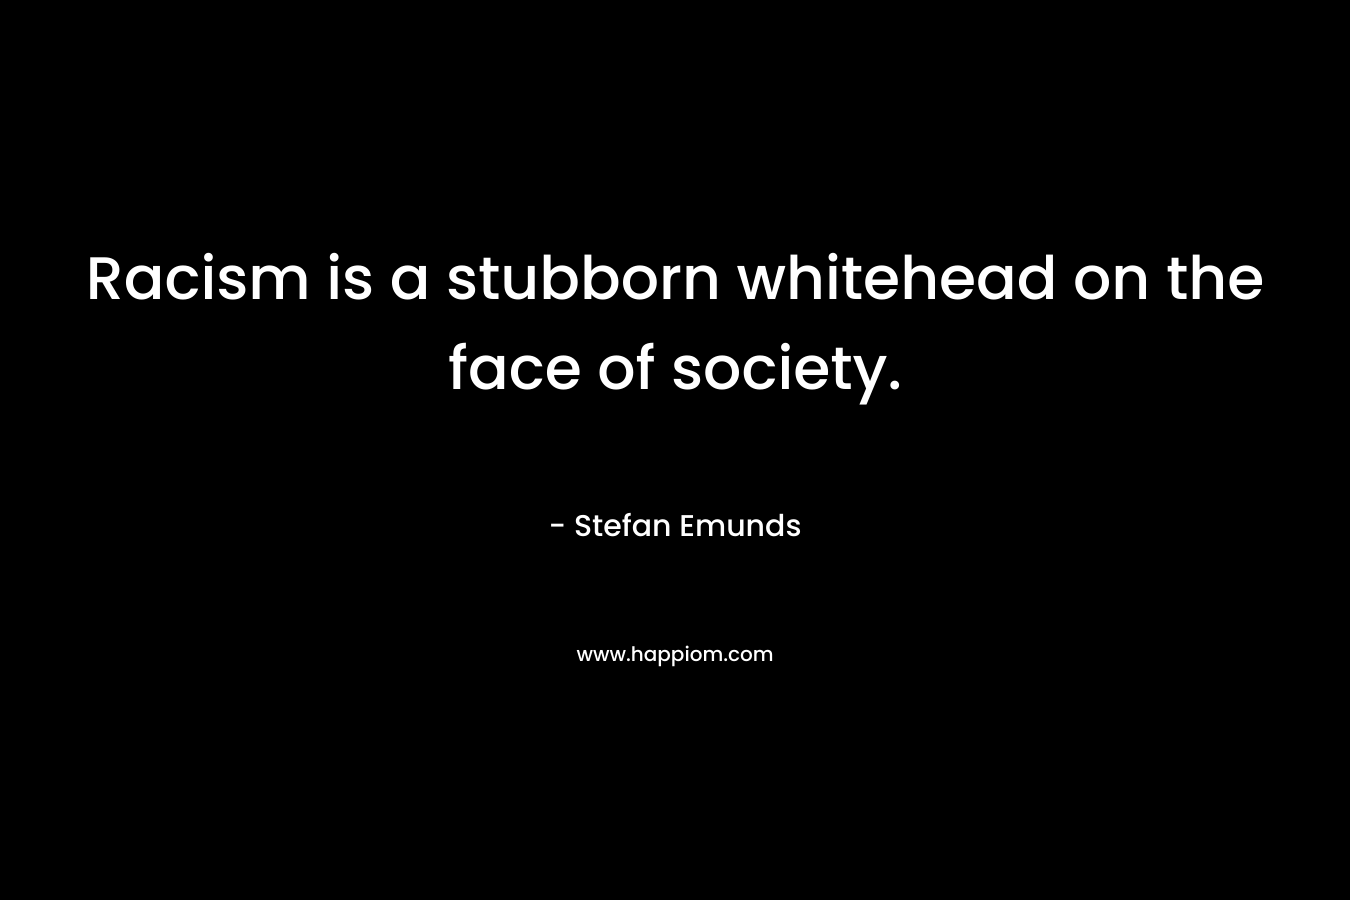 Racism is a stubborn whitehead on the face of society. – Stefan Emunds